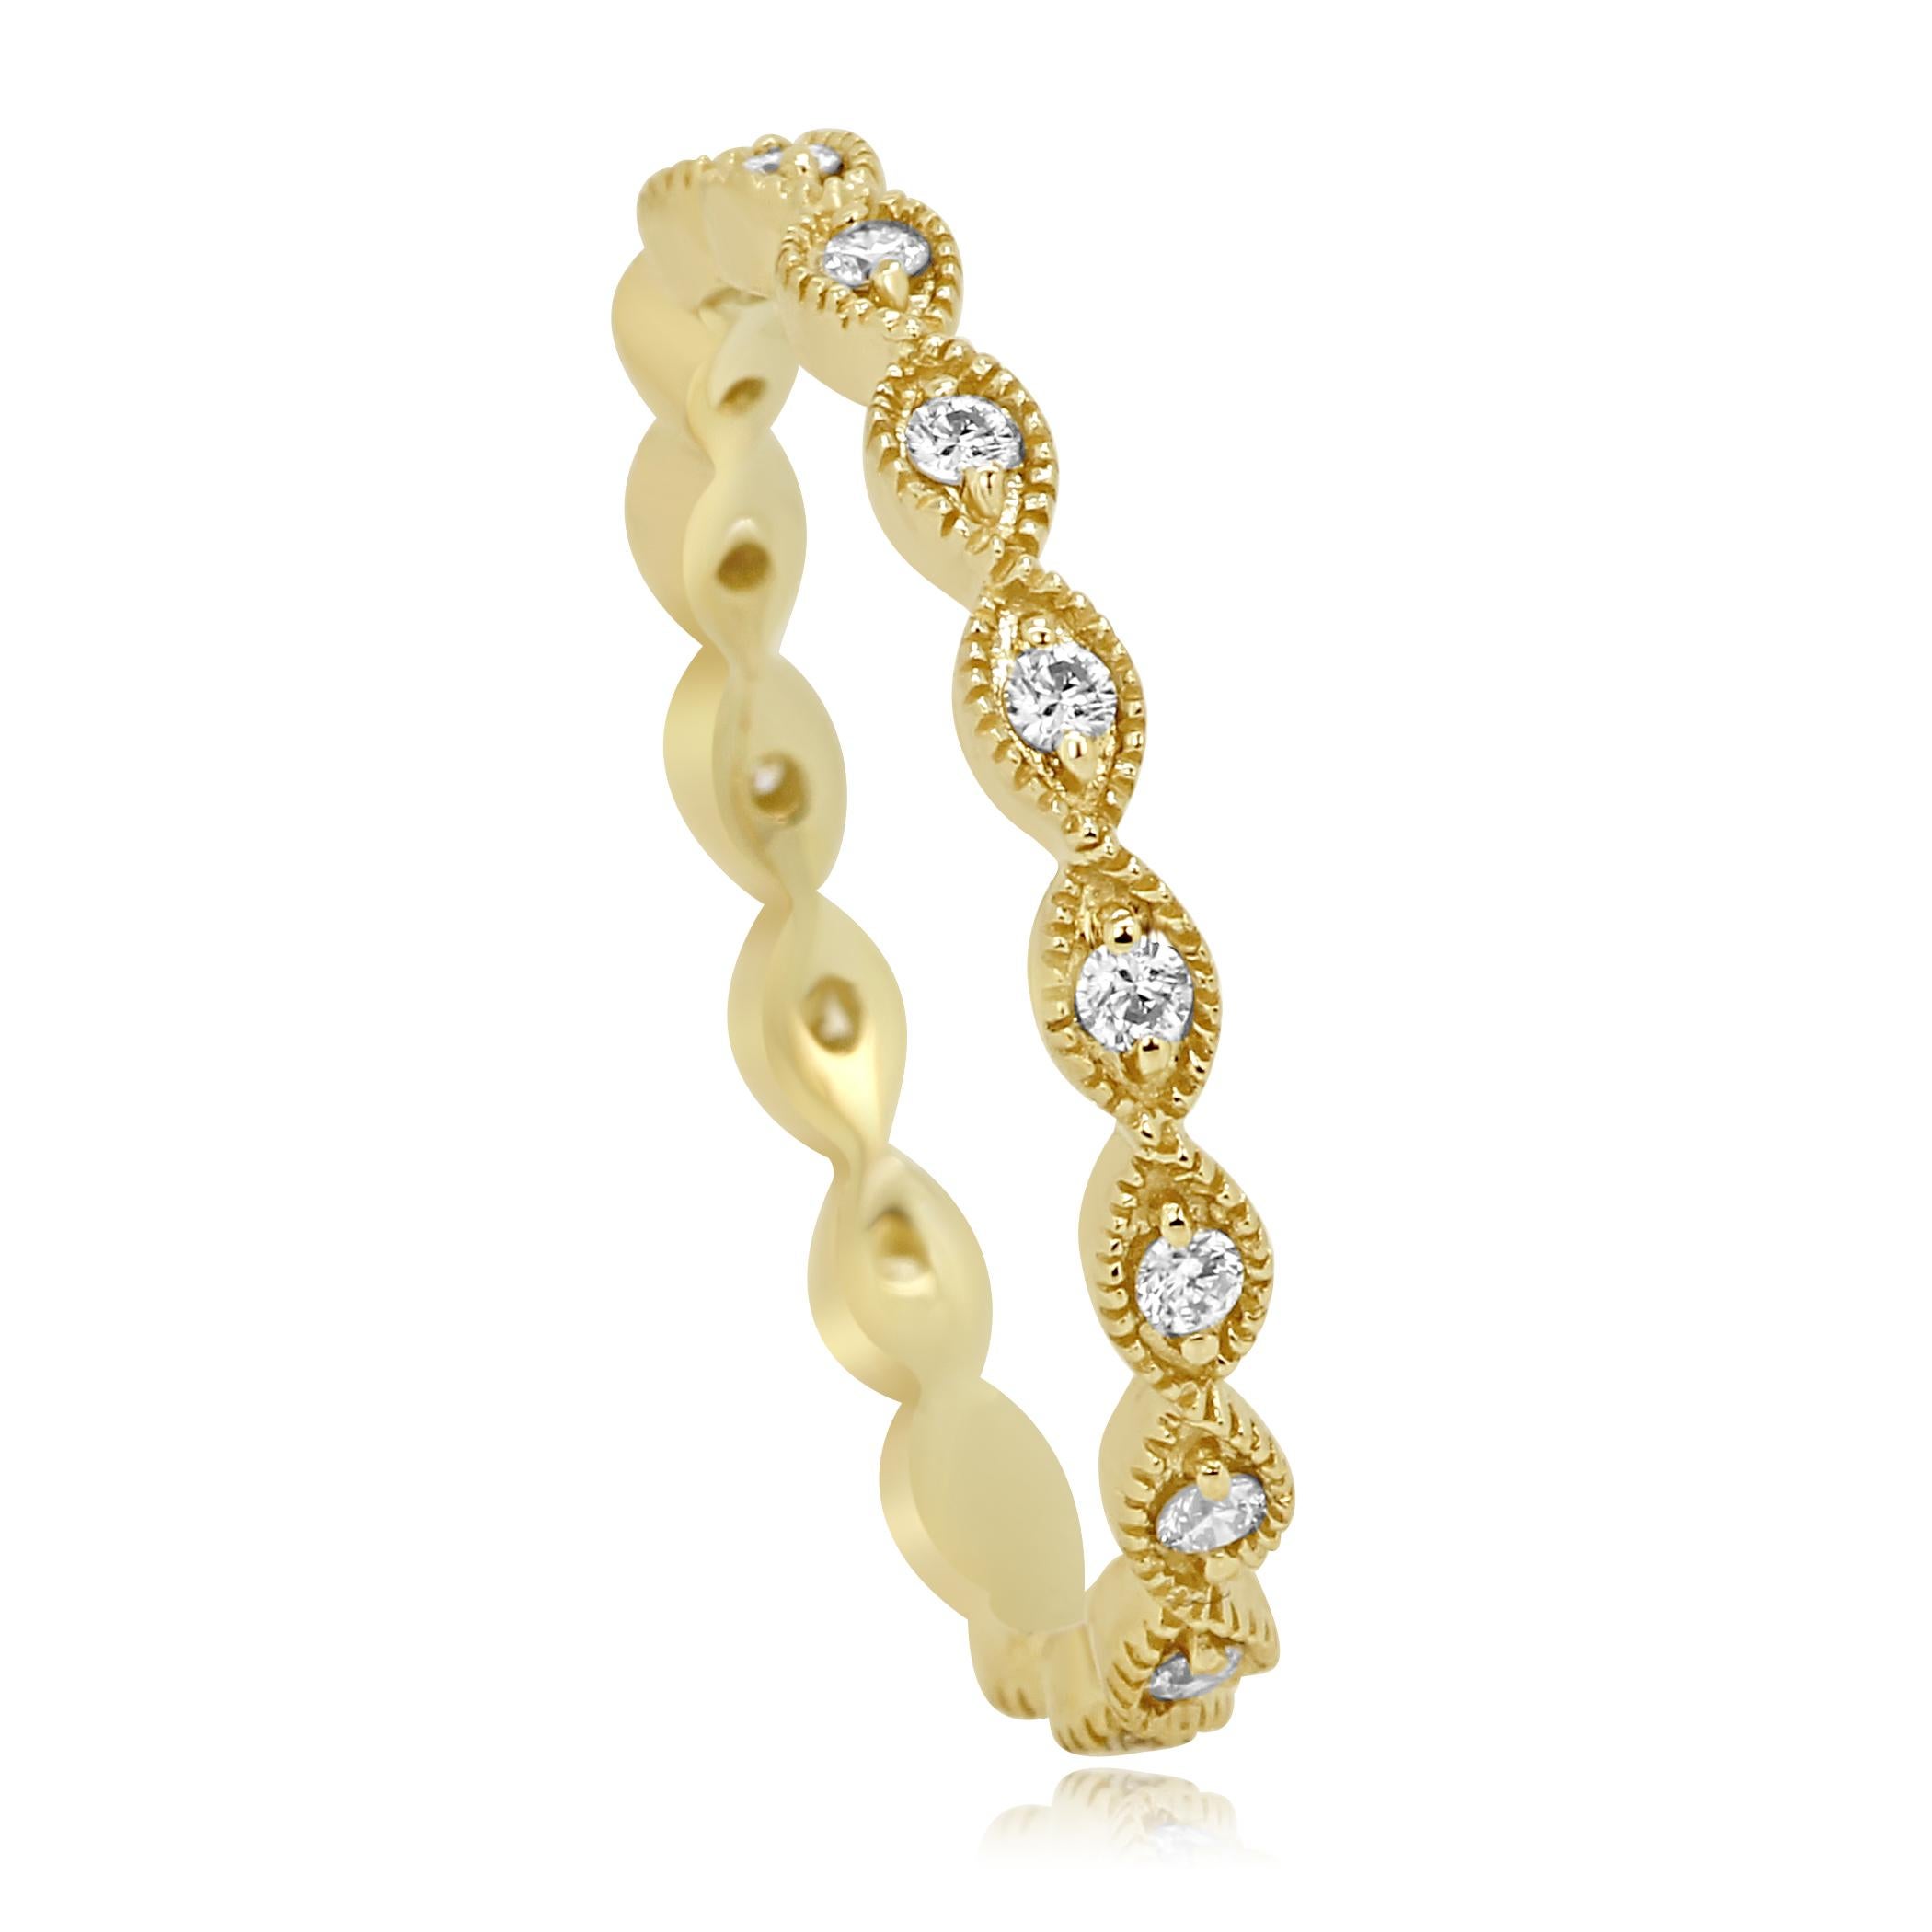 Chic Eternity Band with white diamond rounds 0.19 Carat set in 14K Yellow Gold Ring with Milgrain work  also can be worn as a stackable band. 

Can be customized to any Finger size available in all the gold colors. 
Total Weight 0.19 Carat